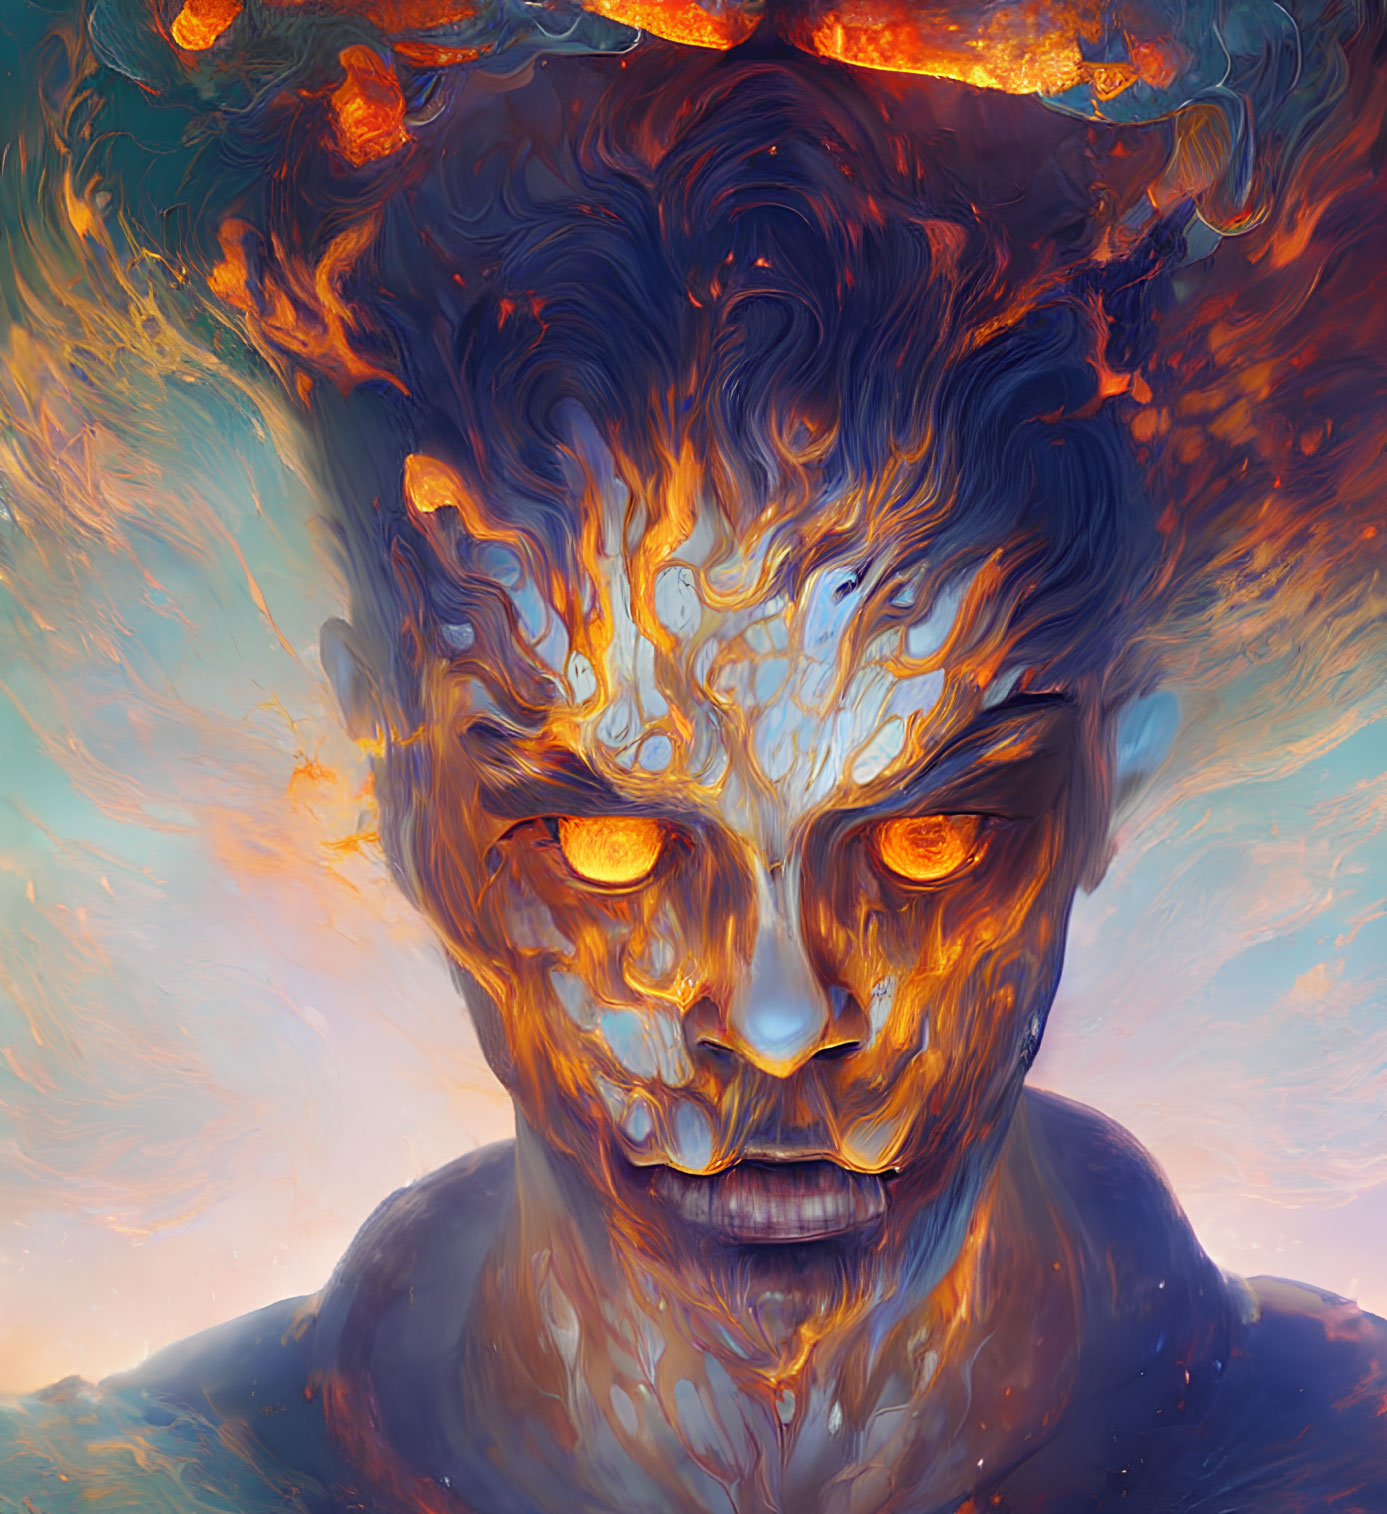 Vibrant human face artwork with fiery colors